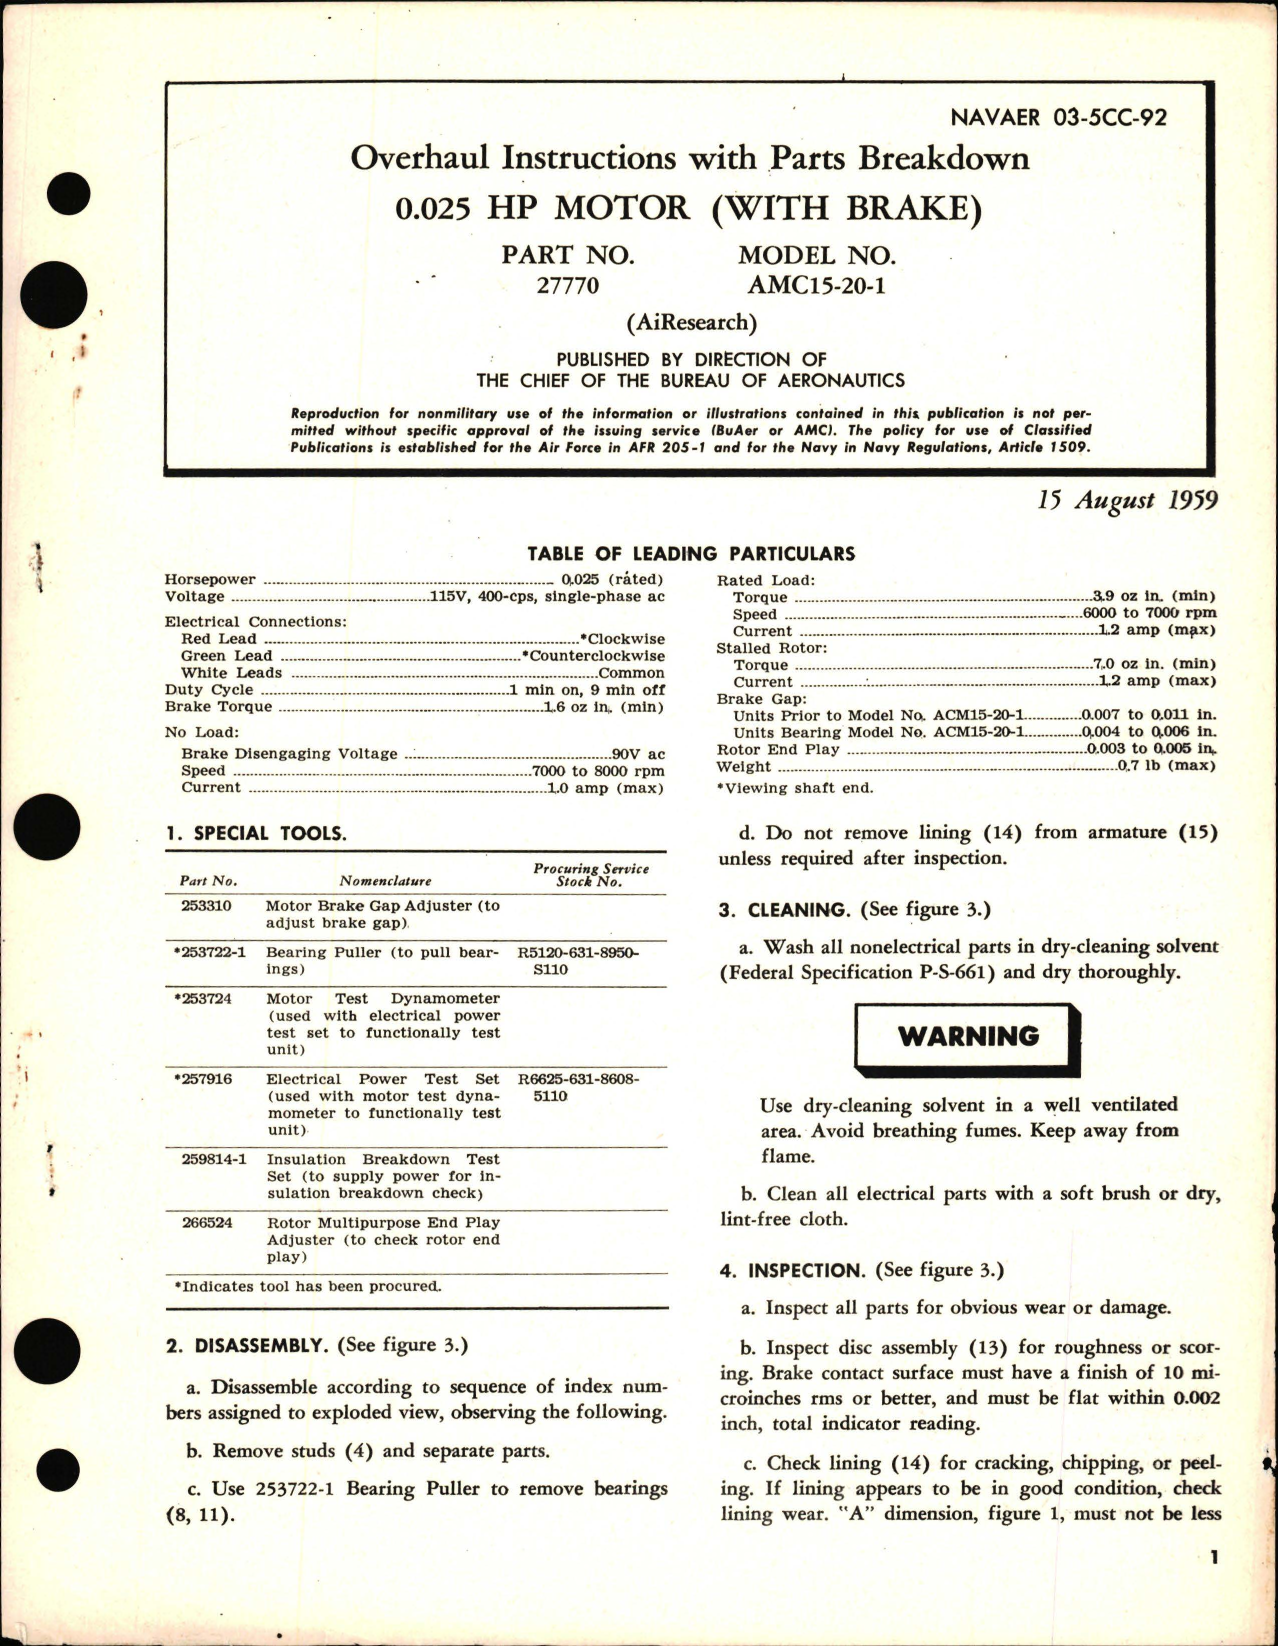 Sample page 1 from AirCorps Library document: Overhaul Instructions w Parts Breakdown for HP Motor with Brake 0.025 Part 27770 